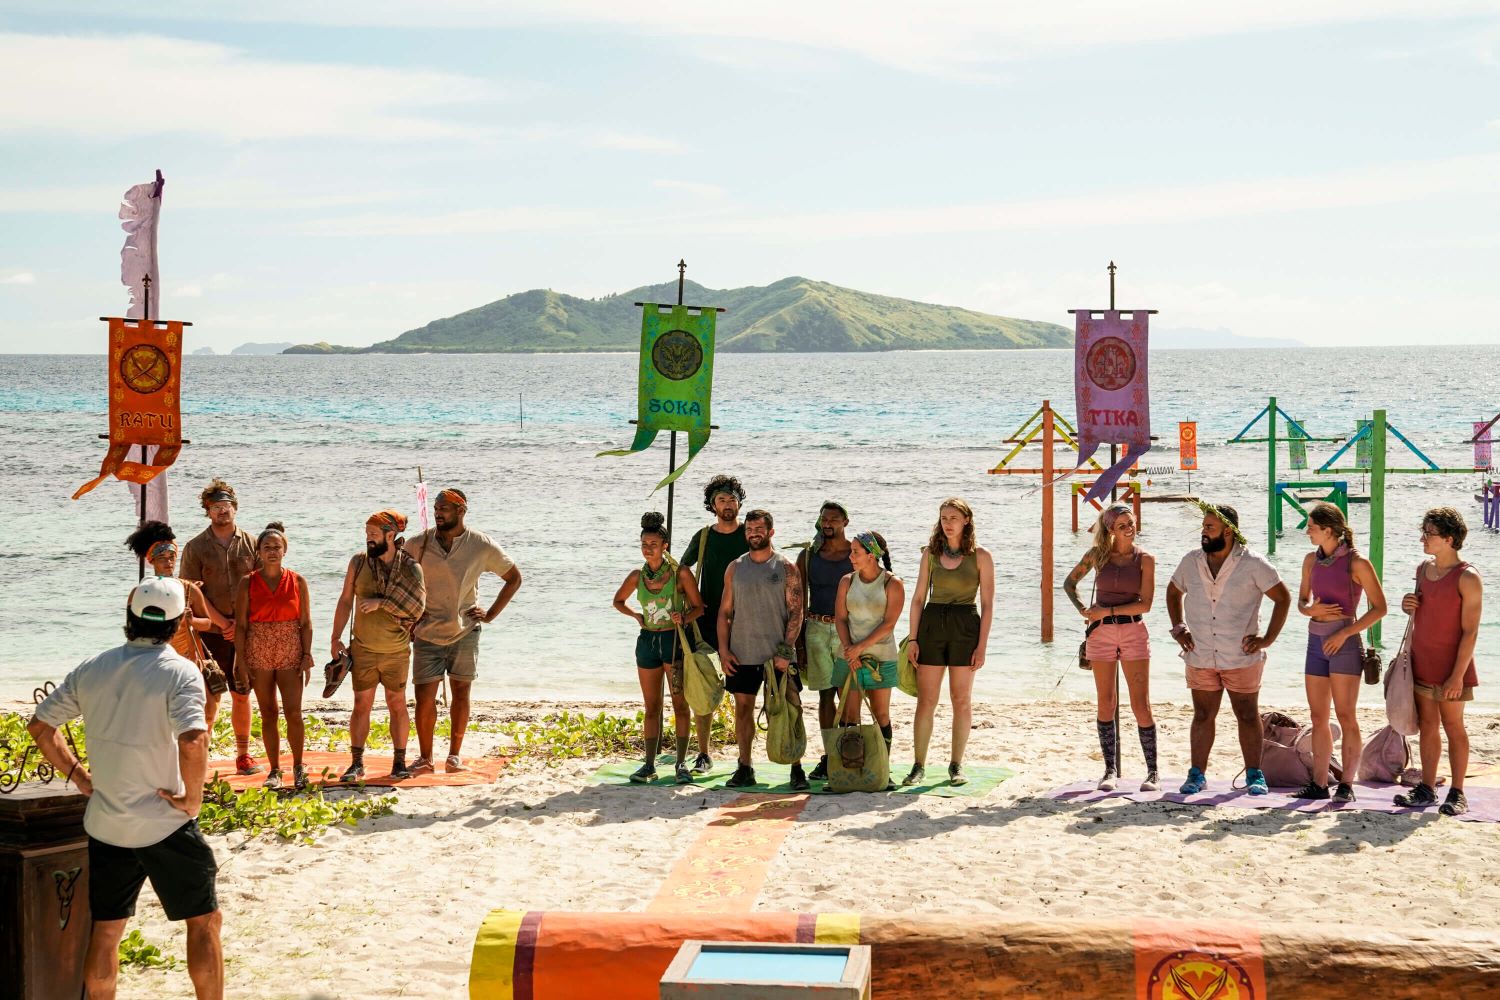 The Ratu, Soka, and Tika tribes listen to host Jeff Probst during a challenge in 'Survivor 44' Episode 3, 'Sneaky Little Snake,' on CBS.